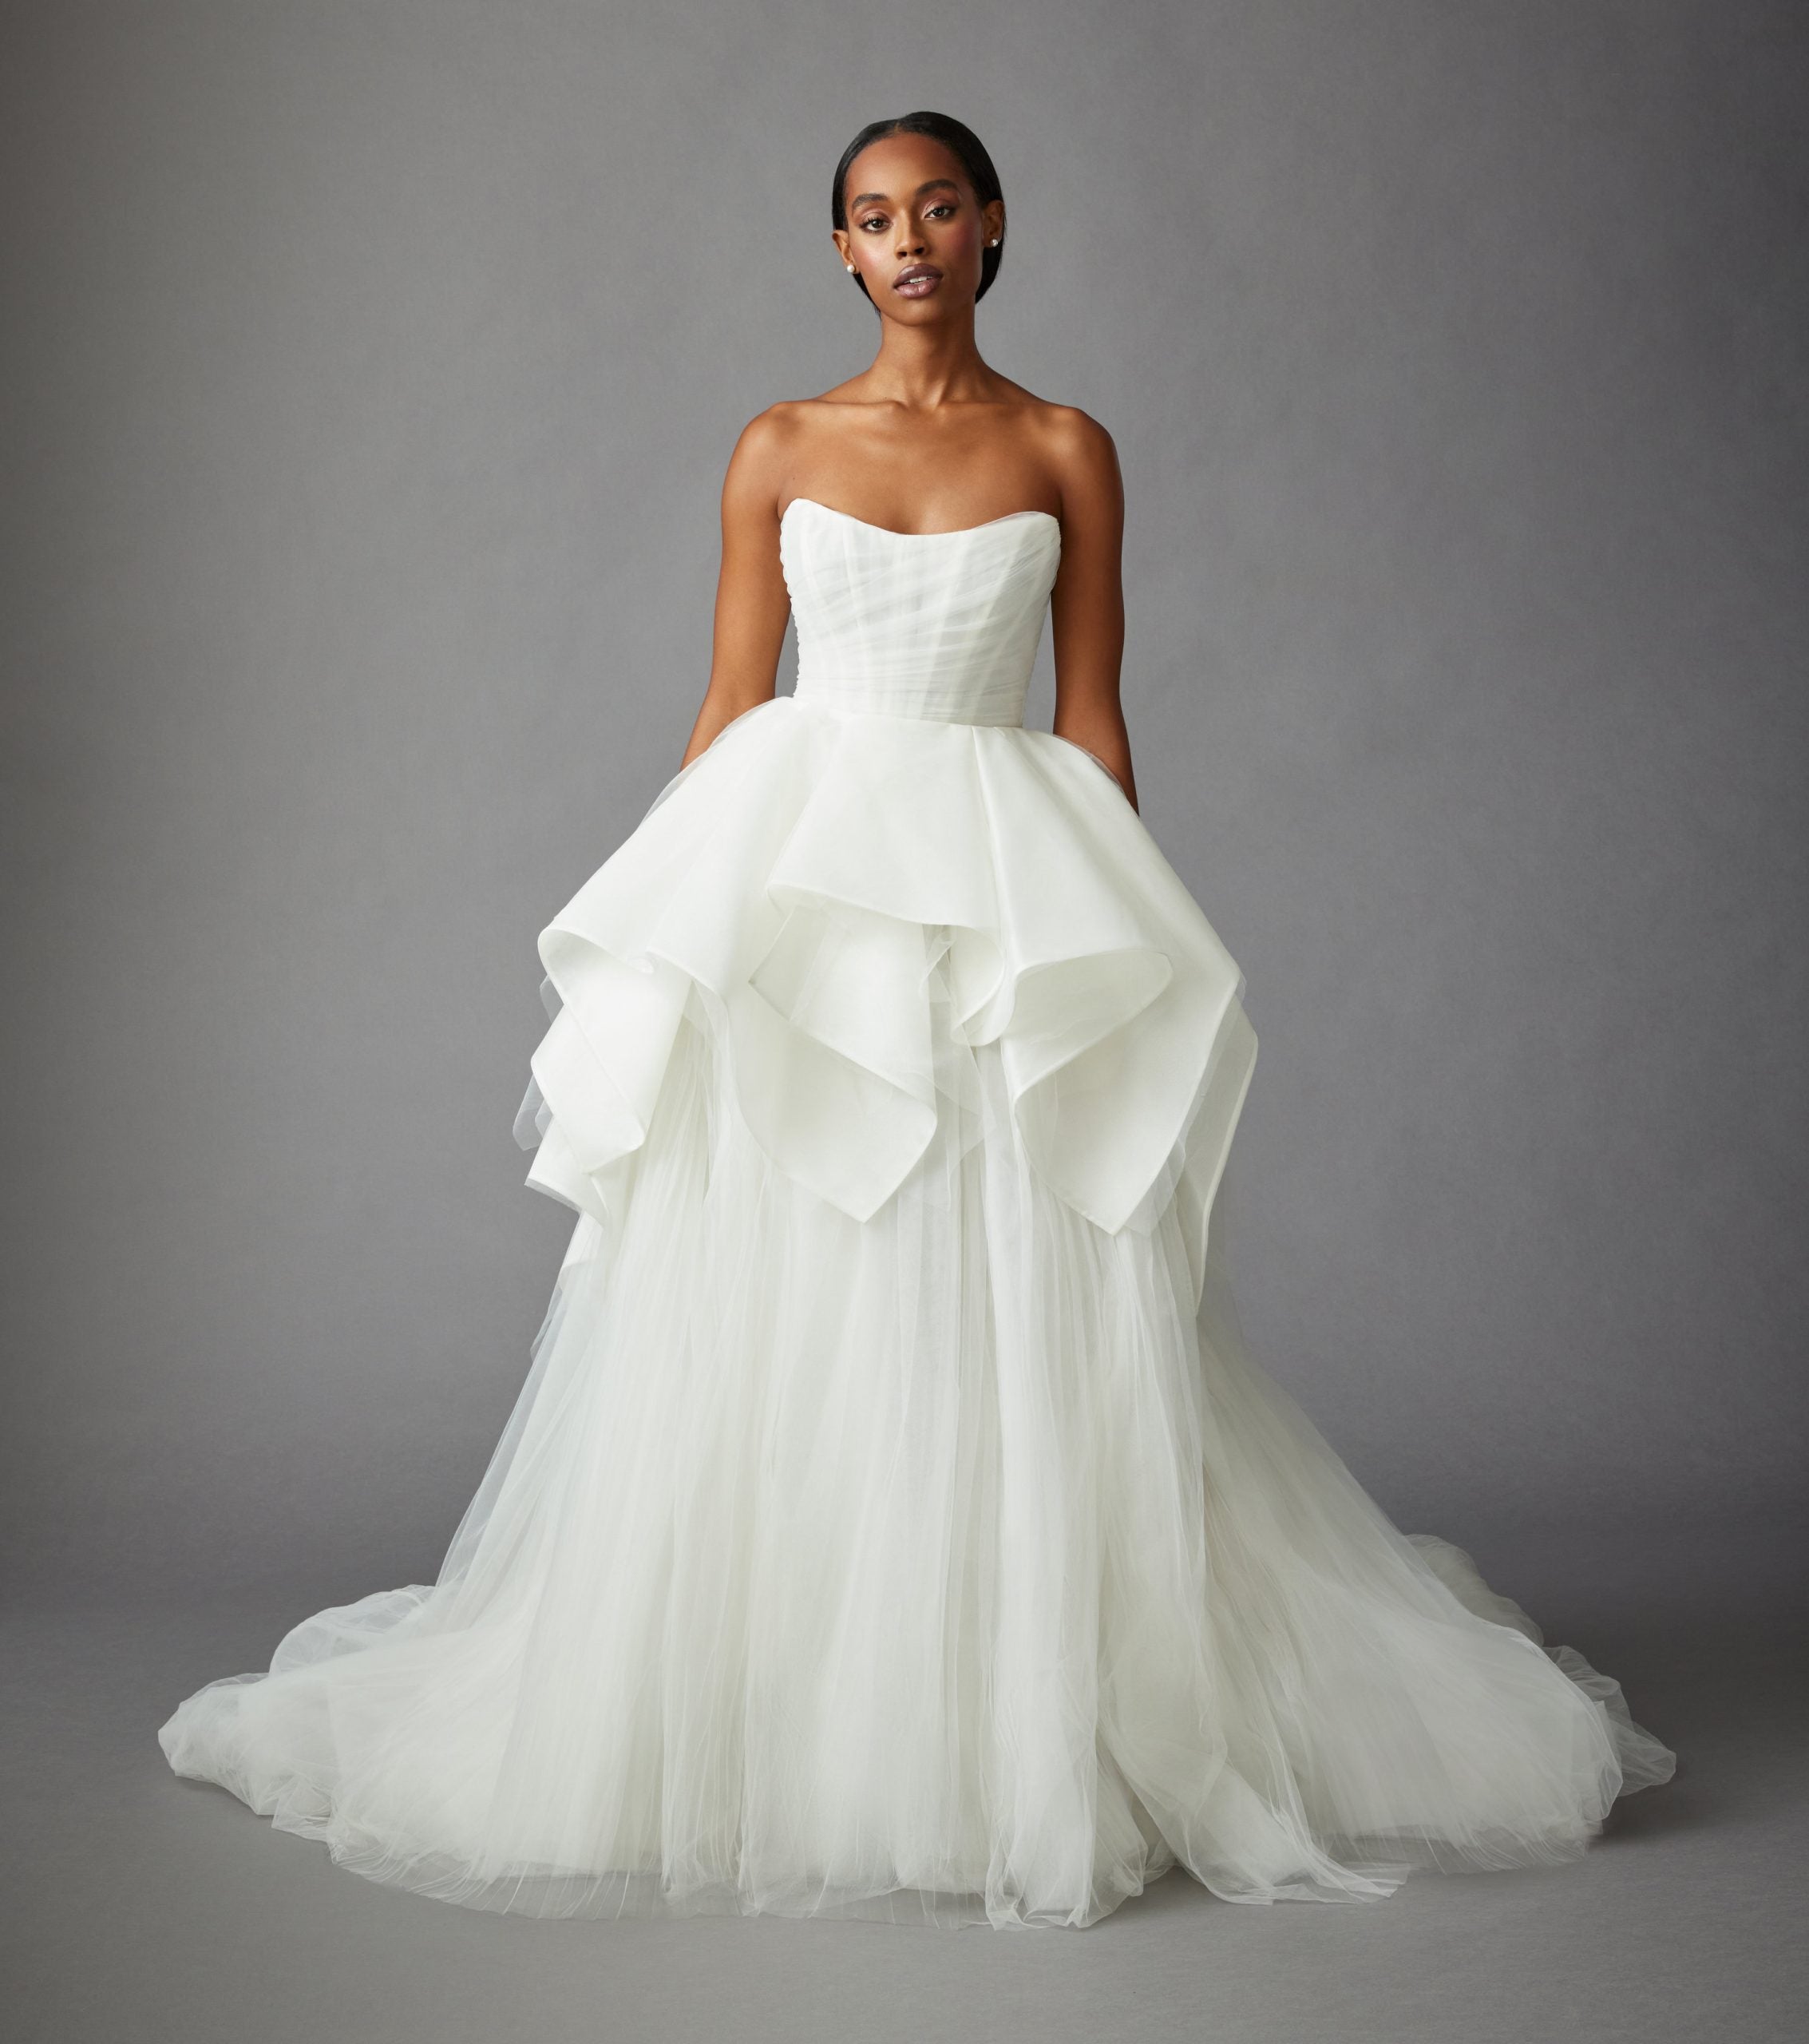 Strapless Ball Gown Wedding Dress With Corset Bodice by Allison Webb